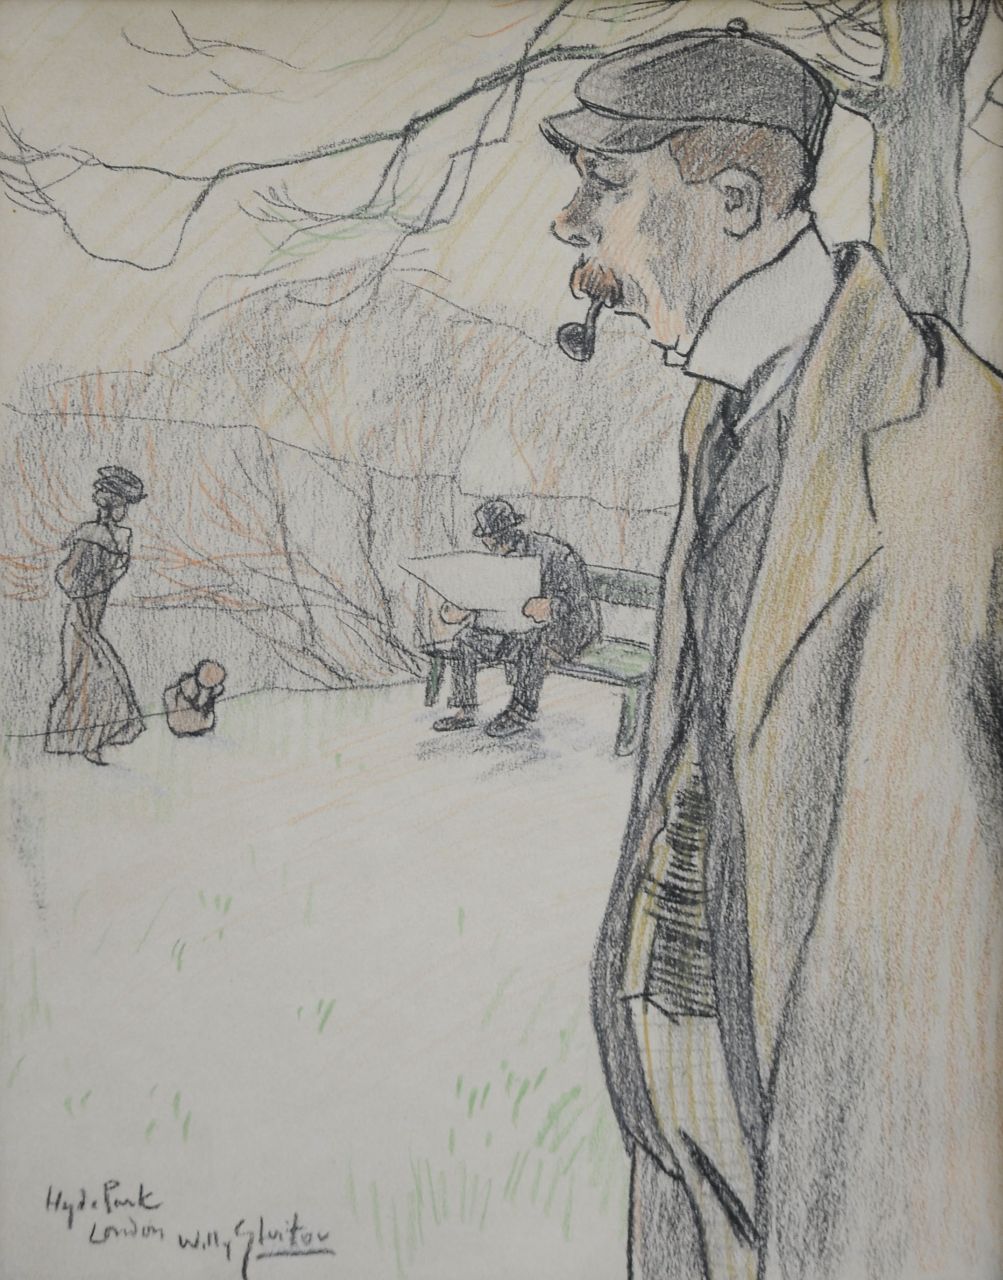 Sluiter J.W.  | Jan Willem 'Willy' Sluiter | Watercolours and drawings offered for sale | In Hyde Park, London, chalk on paper 28.8 x 22.8 cm, signed l.l.